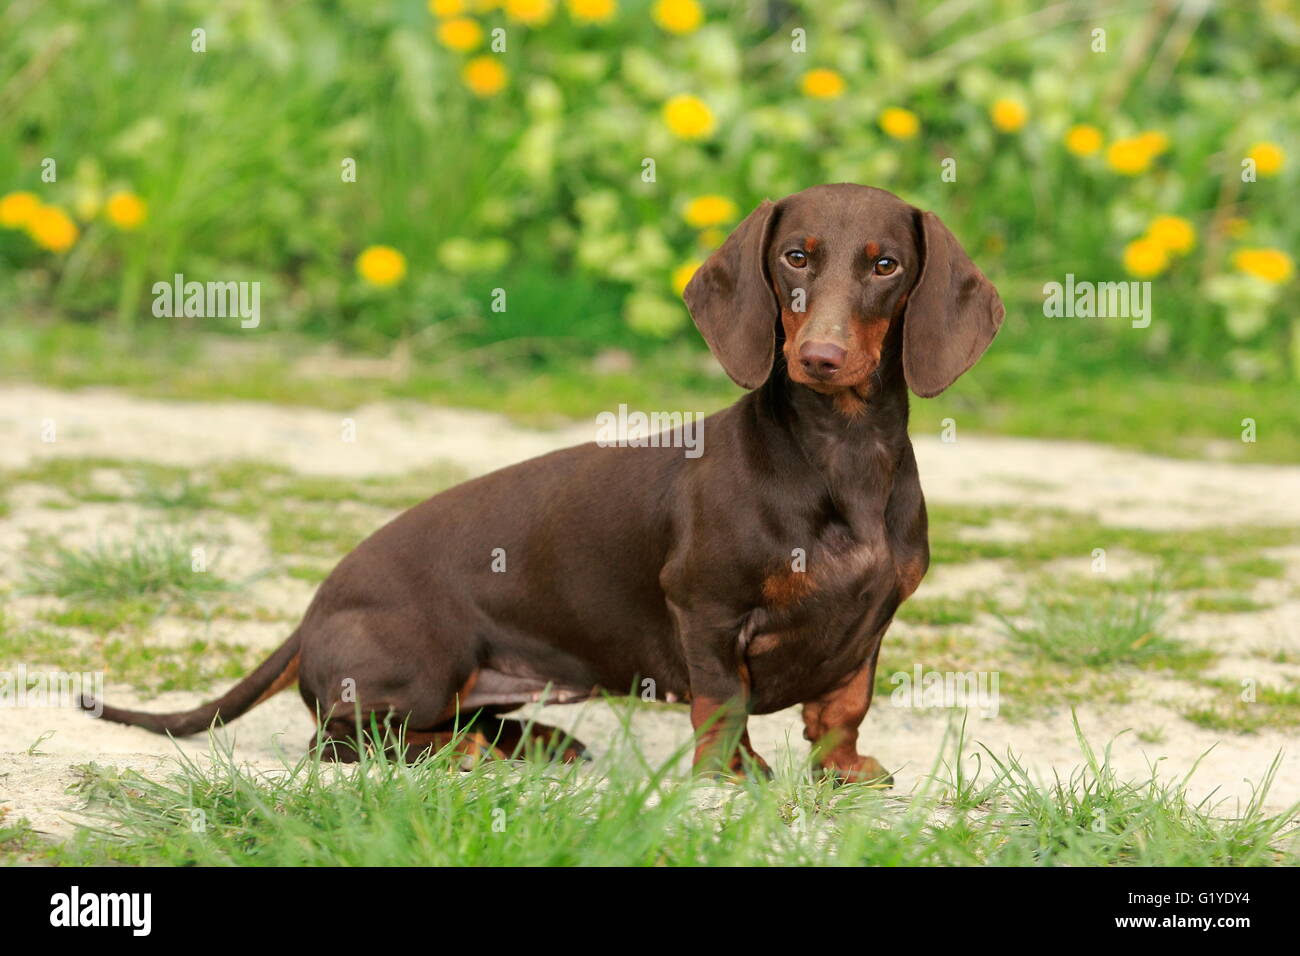 Dachshund, Shorthair, 9 months old, sitting on a path in front of flower meadow, North Rhine-Westphalia, Germany Stock Photo